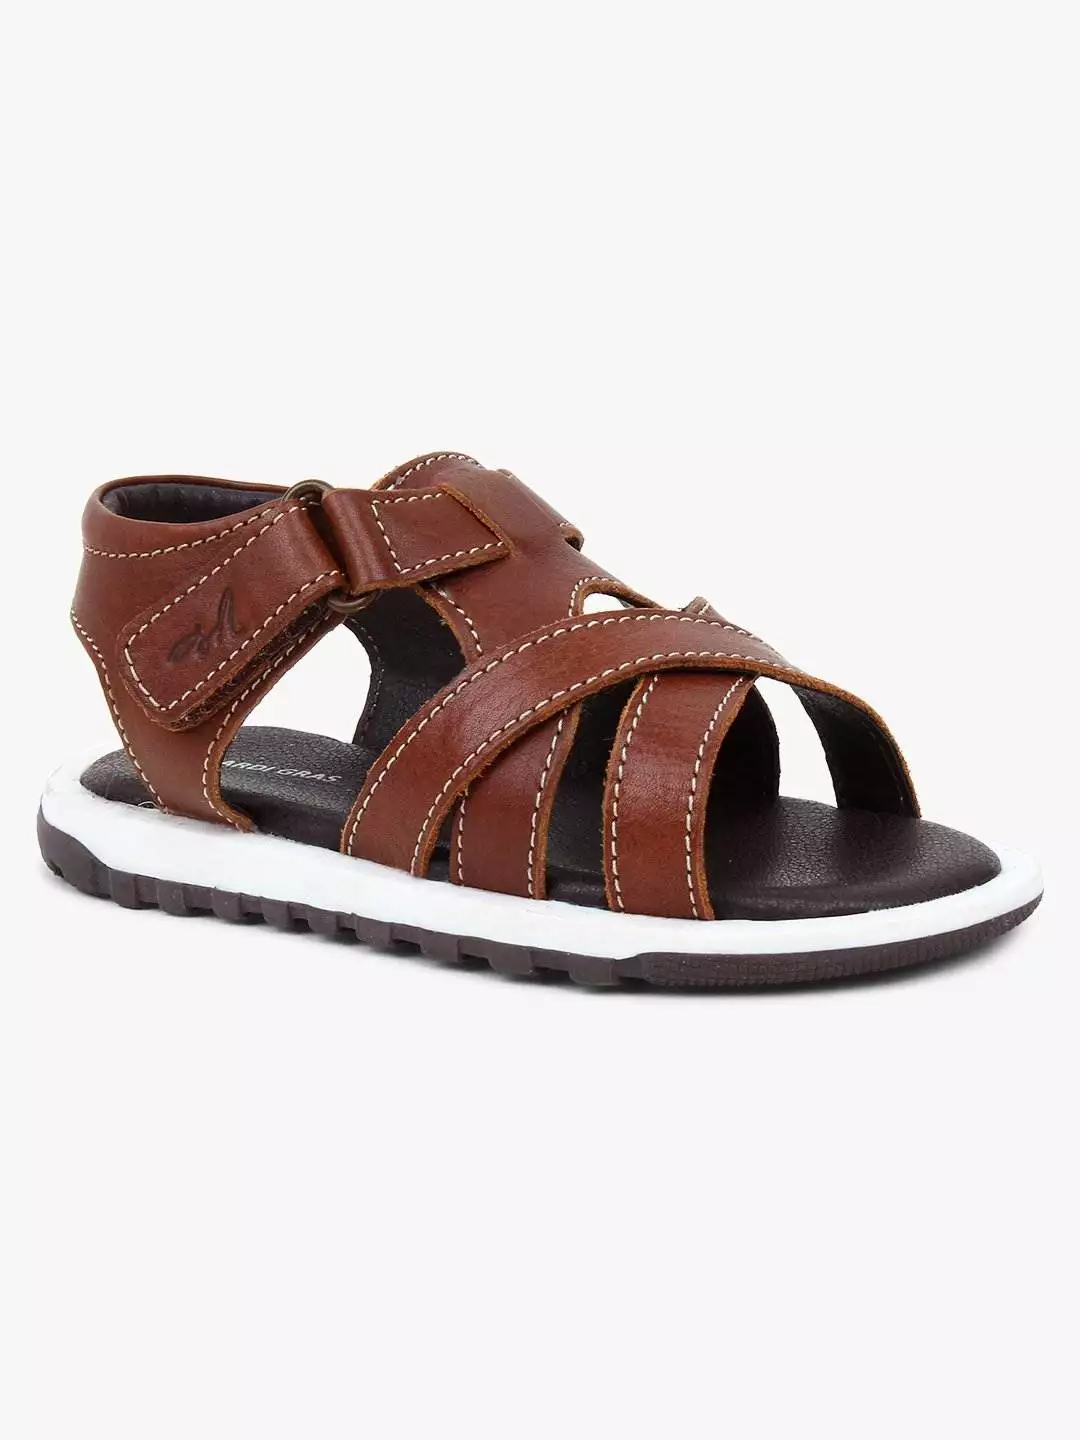 Buy Baby Toddler Leather White Boys Girls Soft Sole Hard Sole Sandals.toddler  Boy Sandals, Wedding Shoes Online in India - Etsy